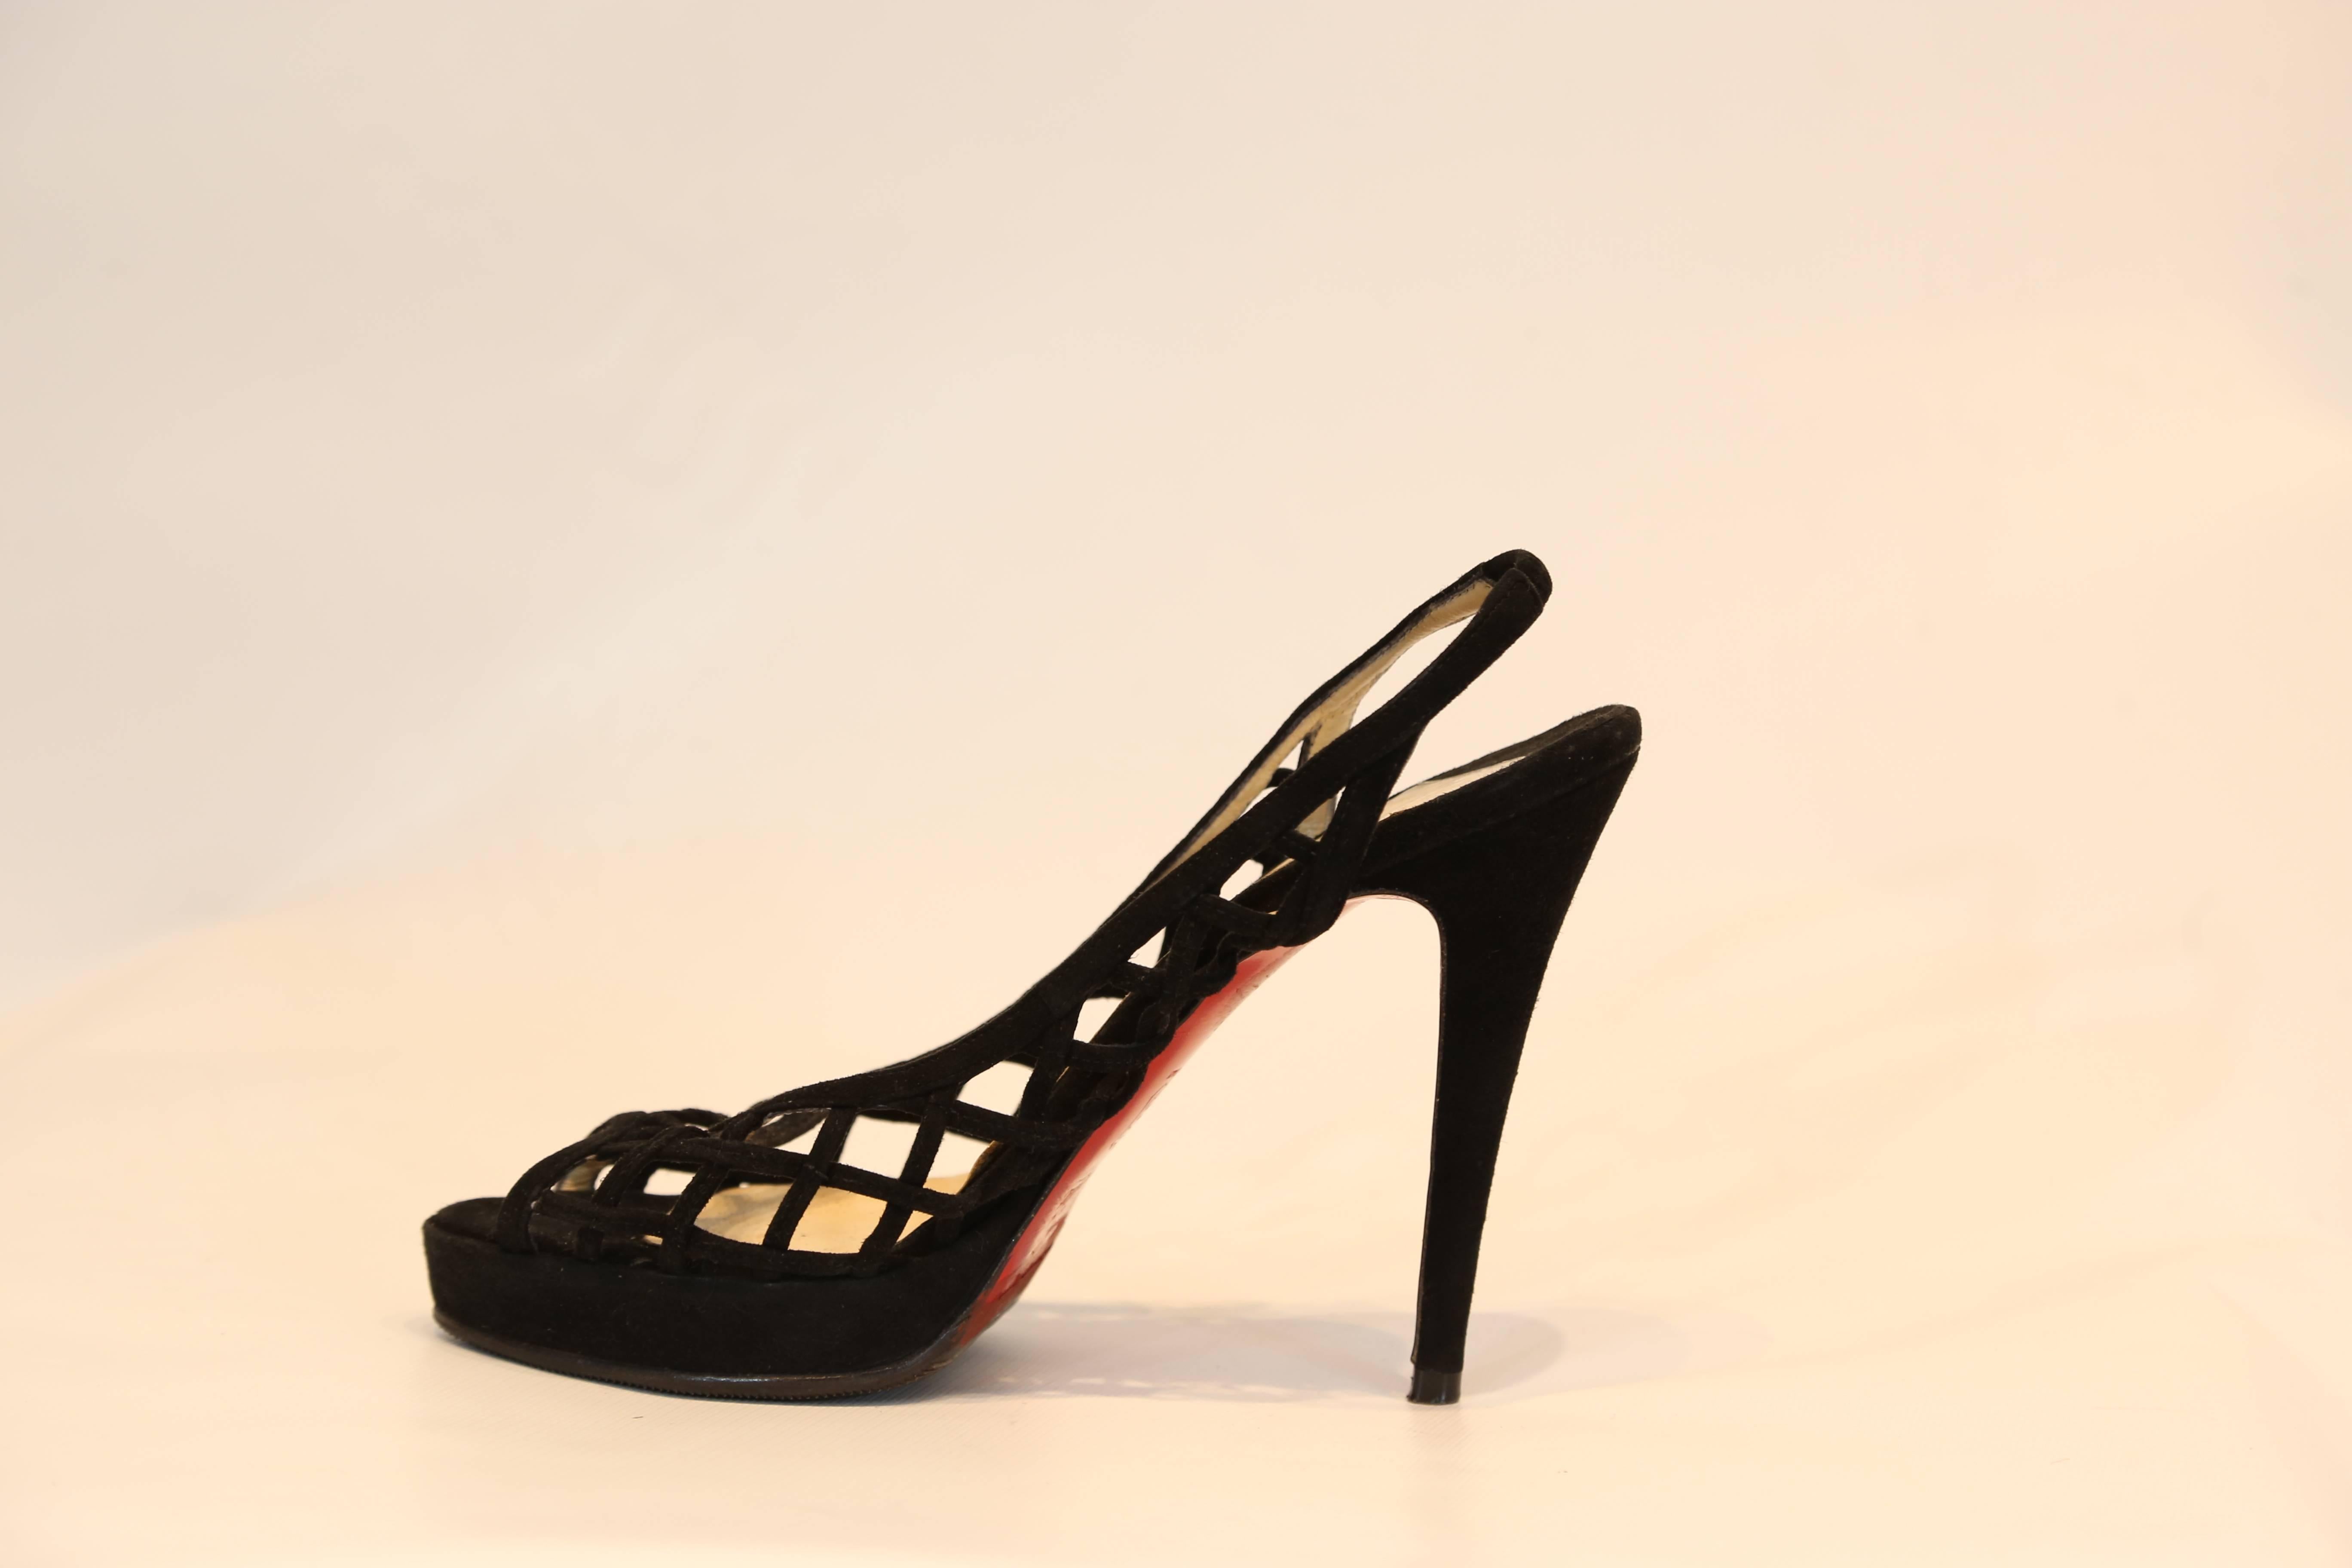 Christian Louboutin black suede slingback with wide cutout detail. 